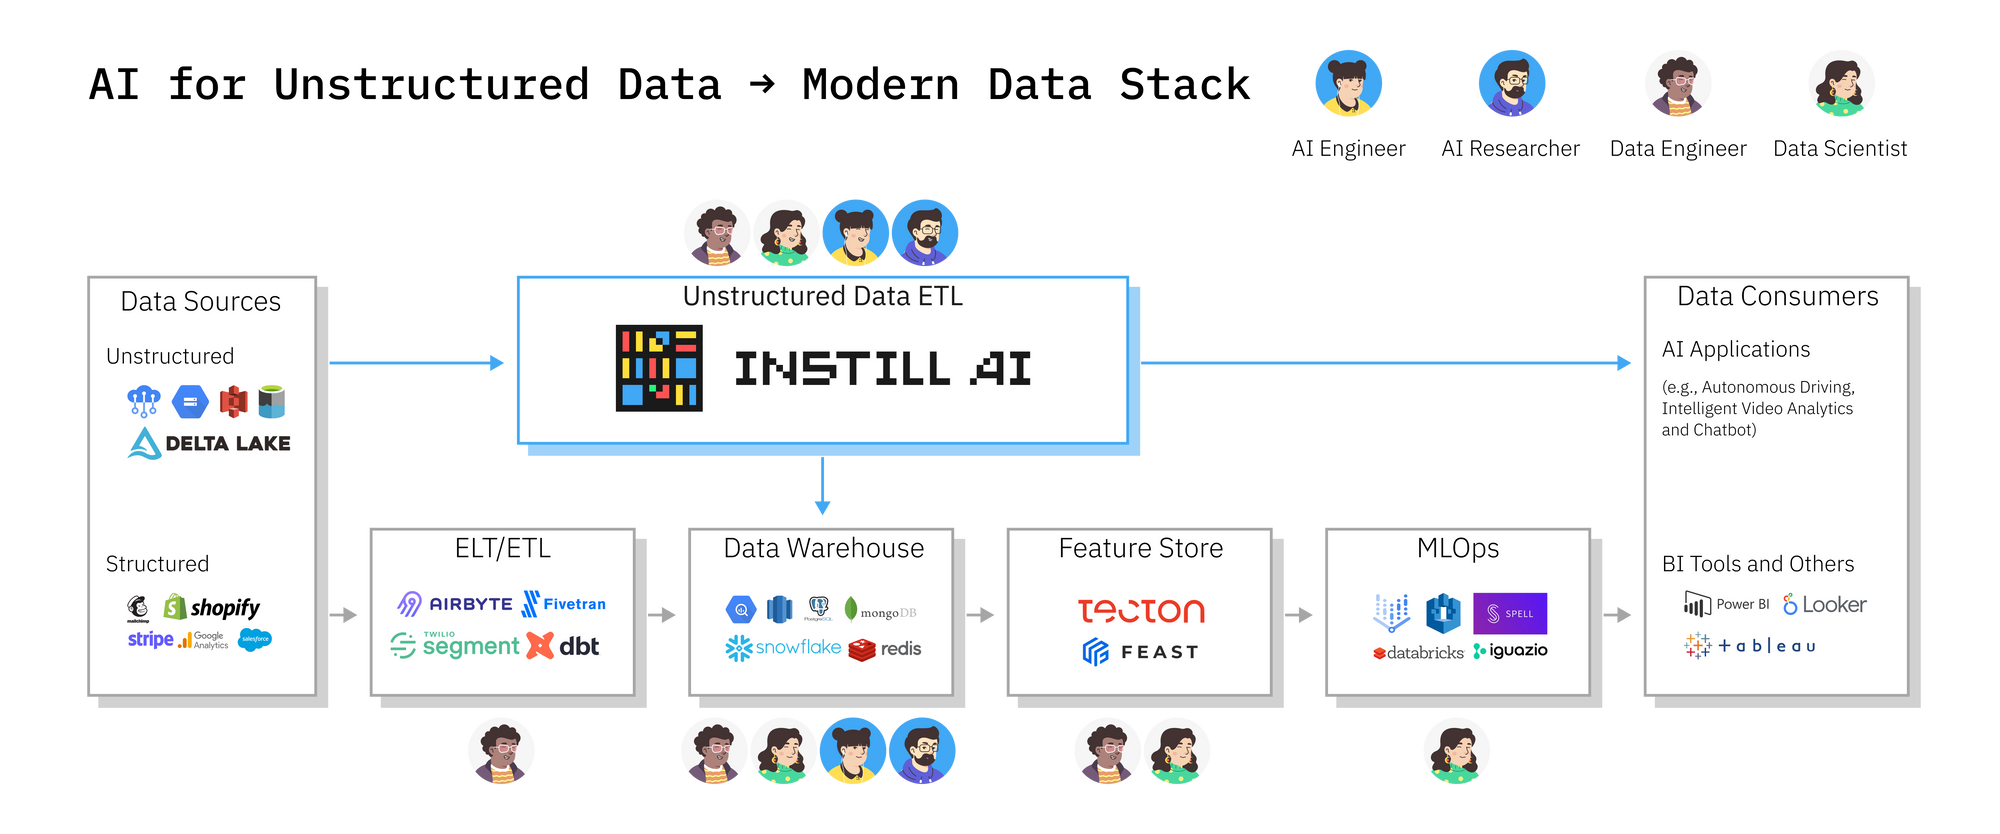 Unstructured data ETL seamlessly brings AI into the modern data stack. It eliminates team silos by streamlining data processing across different roles with a standardised framework.